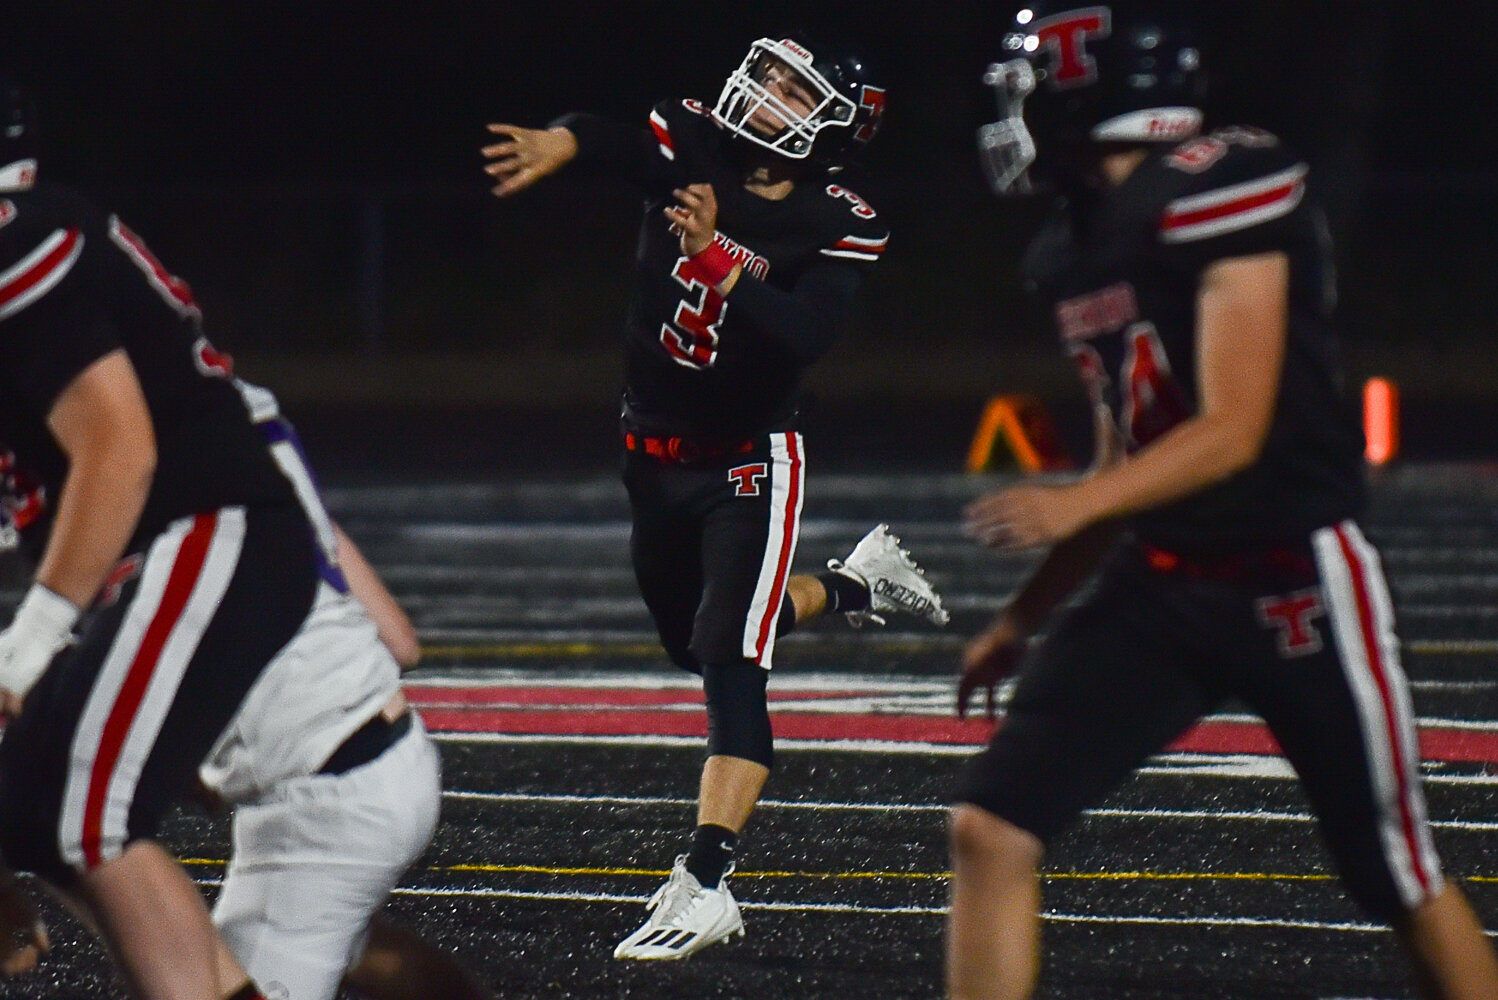 Tenino's Cody Strawn targets a receiver downfield during a 62-21 loss to Onalaska on Sept. 22.